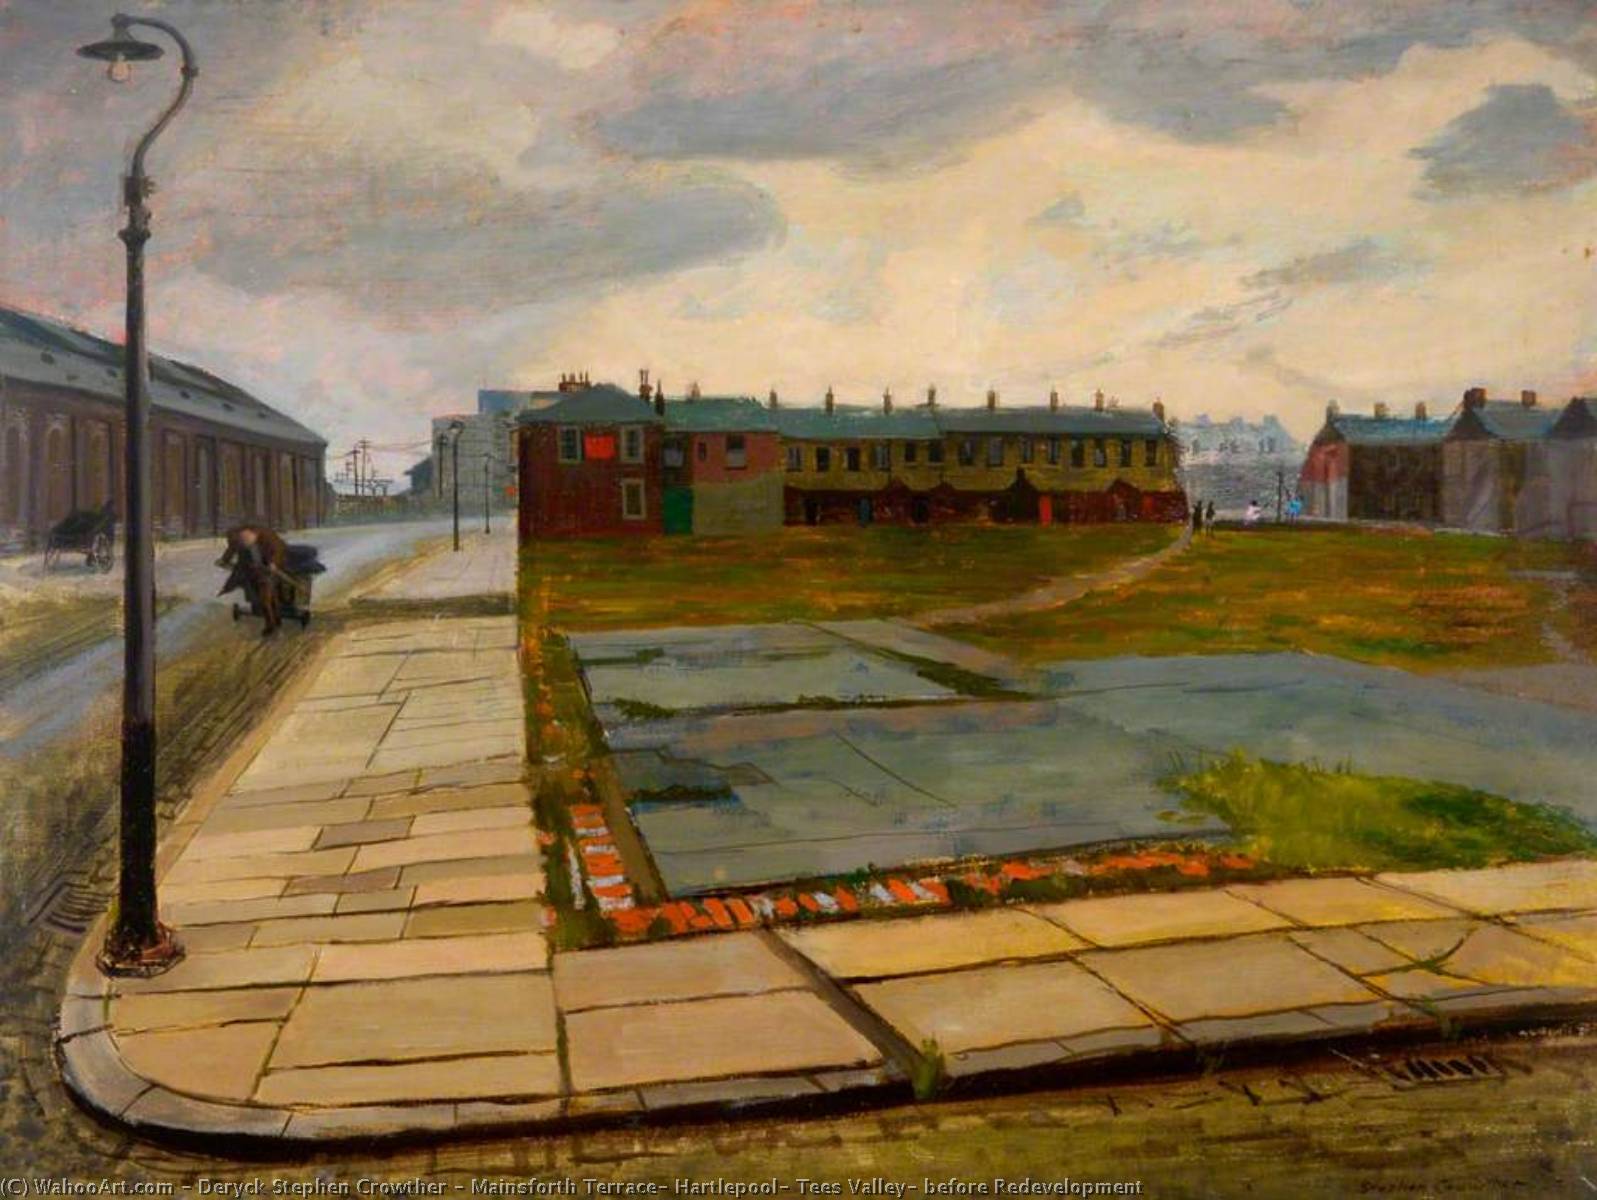 Mainsforth Terrace, Hartlepool, Tees Valley, before Redevelopment by Deryck Stephen Crowther Deryck Stephen Crowther | ArtsDot.com